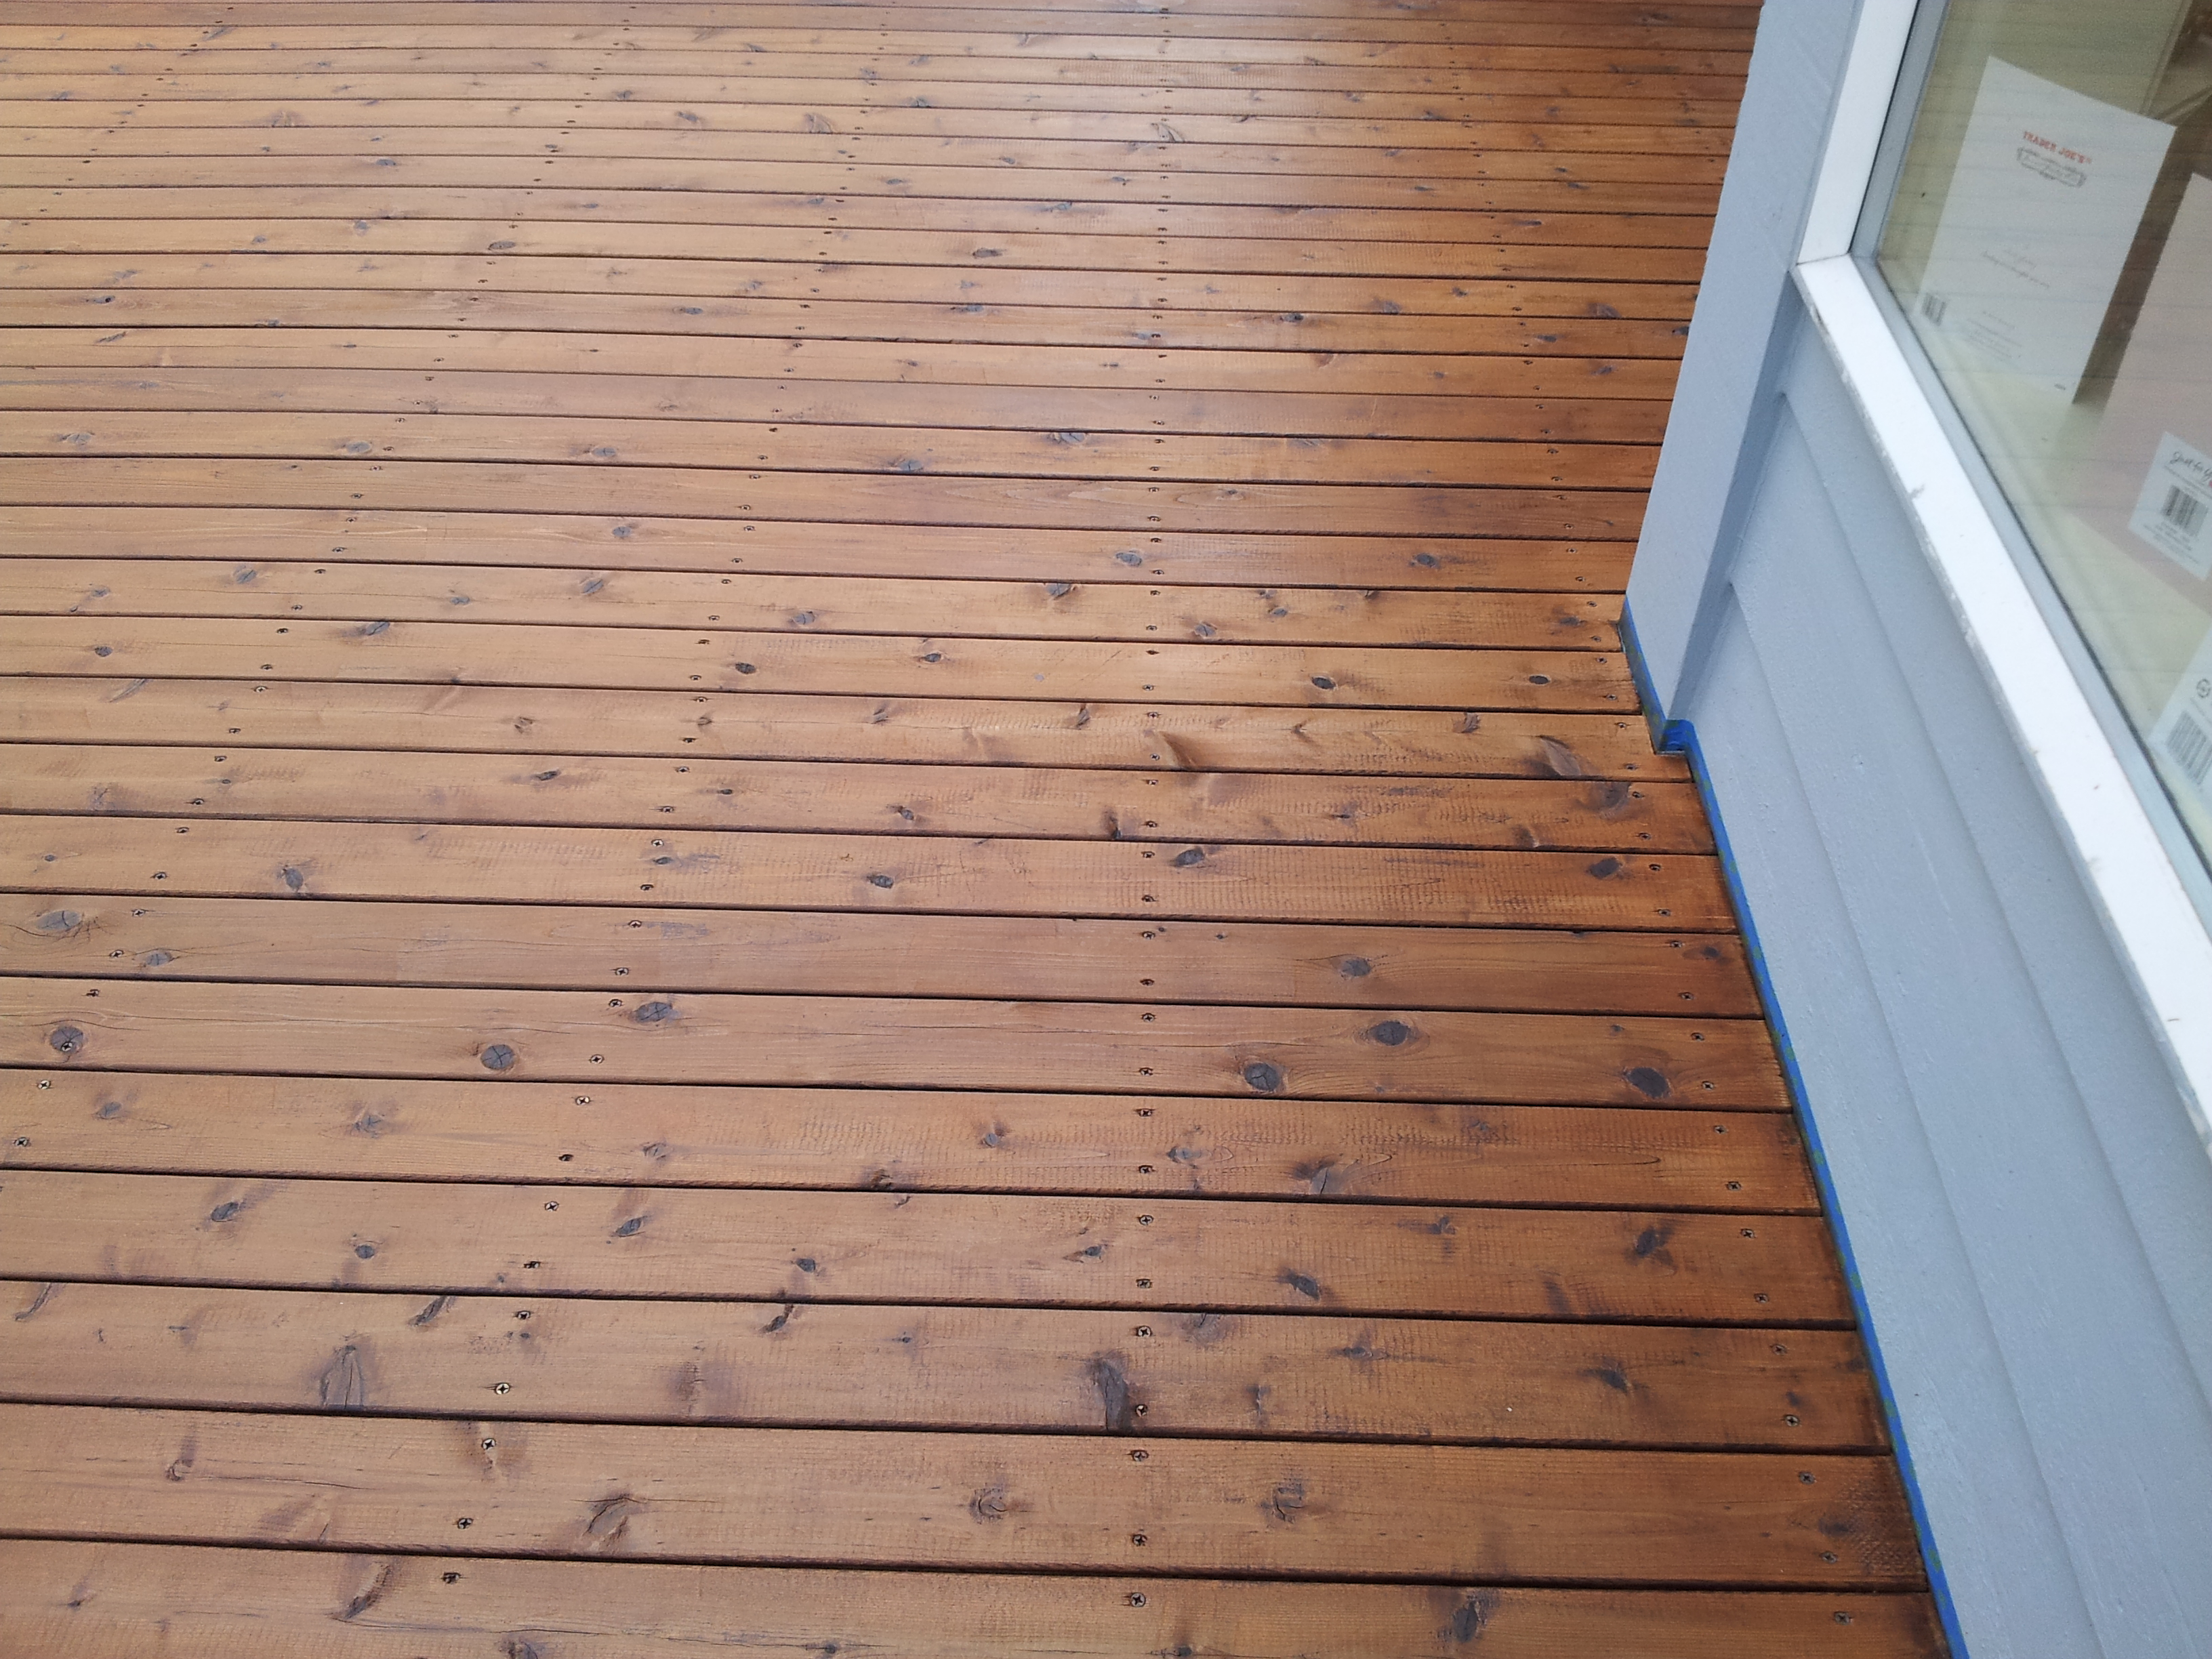 Oil Based Deck Stains 2019 Best Deck Stain Reviews Ratings intended for size 3264 X 2448